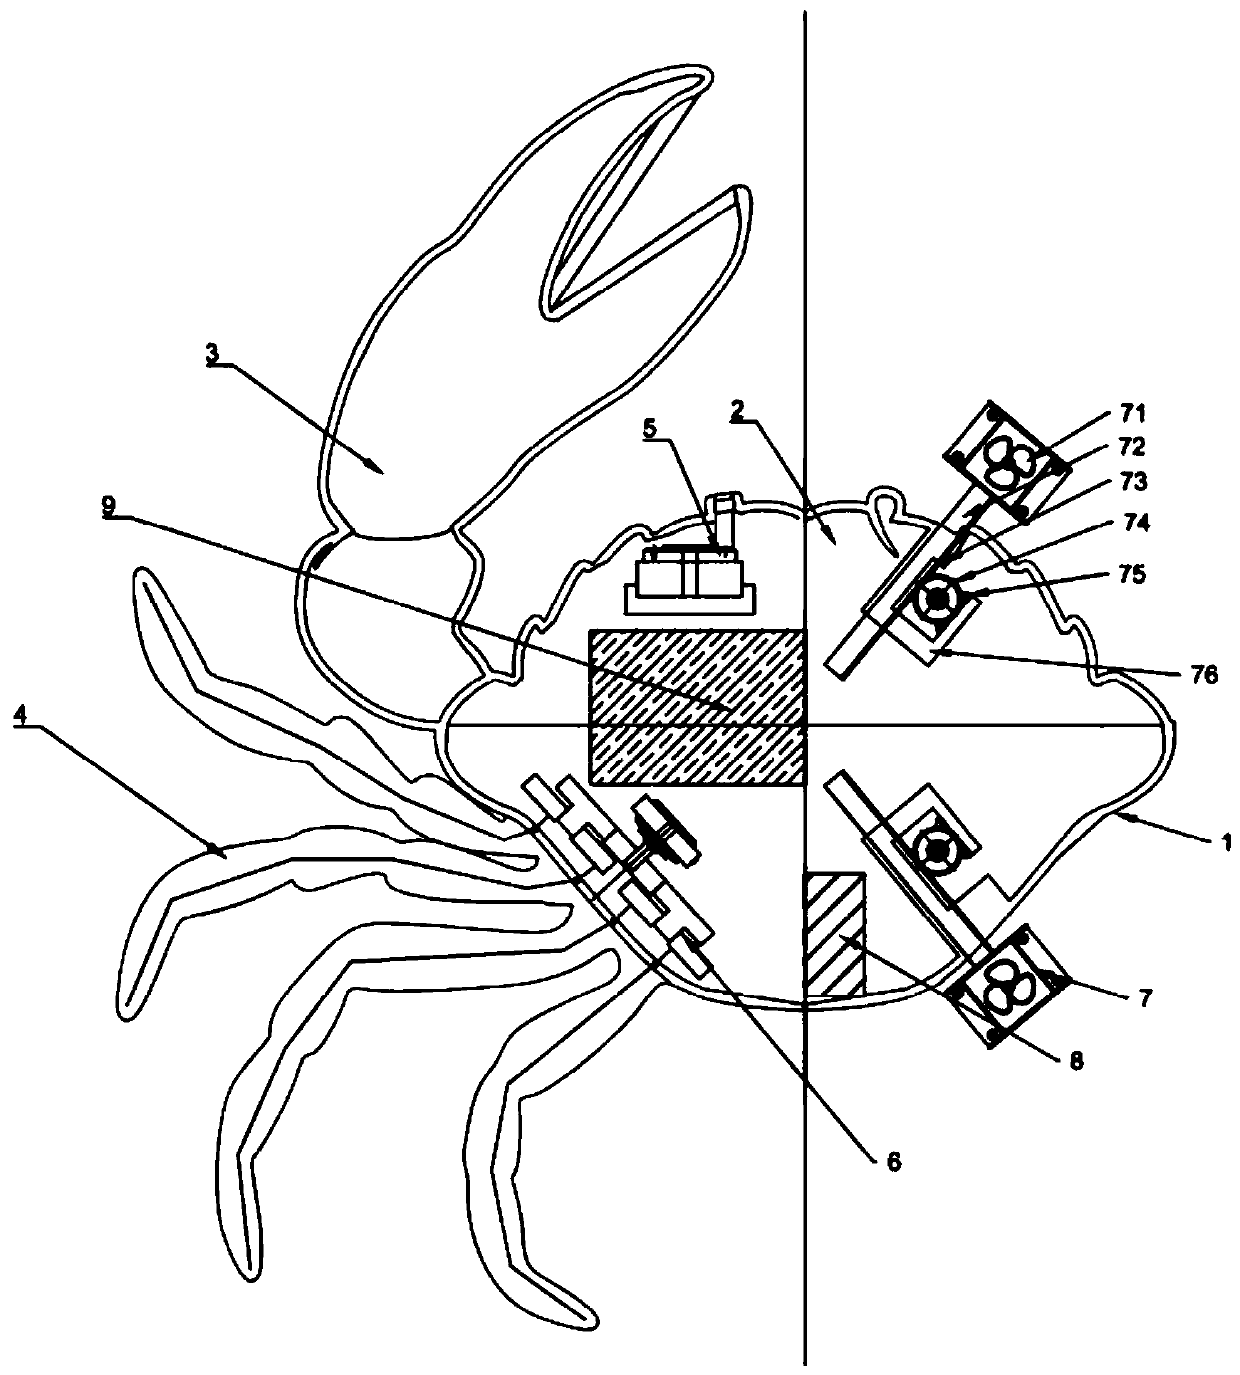 Solar-power diving crab-simulating robot with functions of bionic observation and weeding